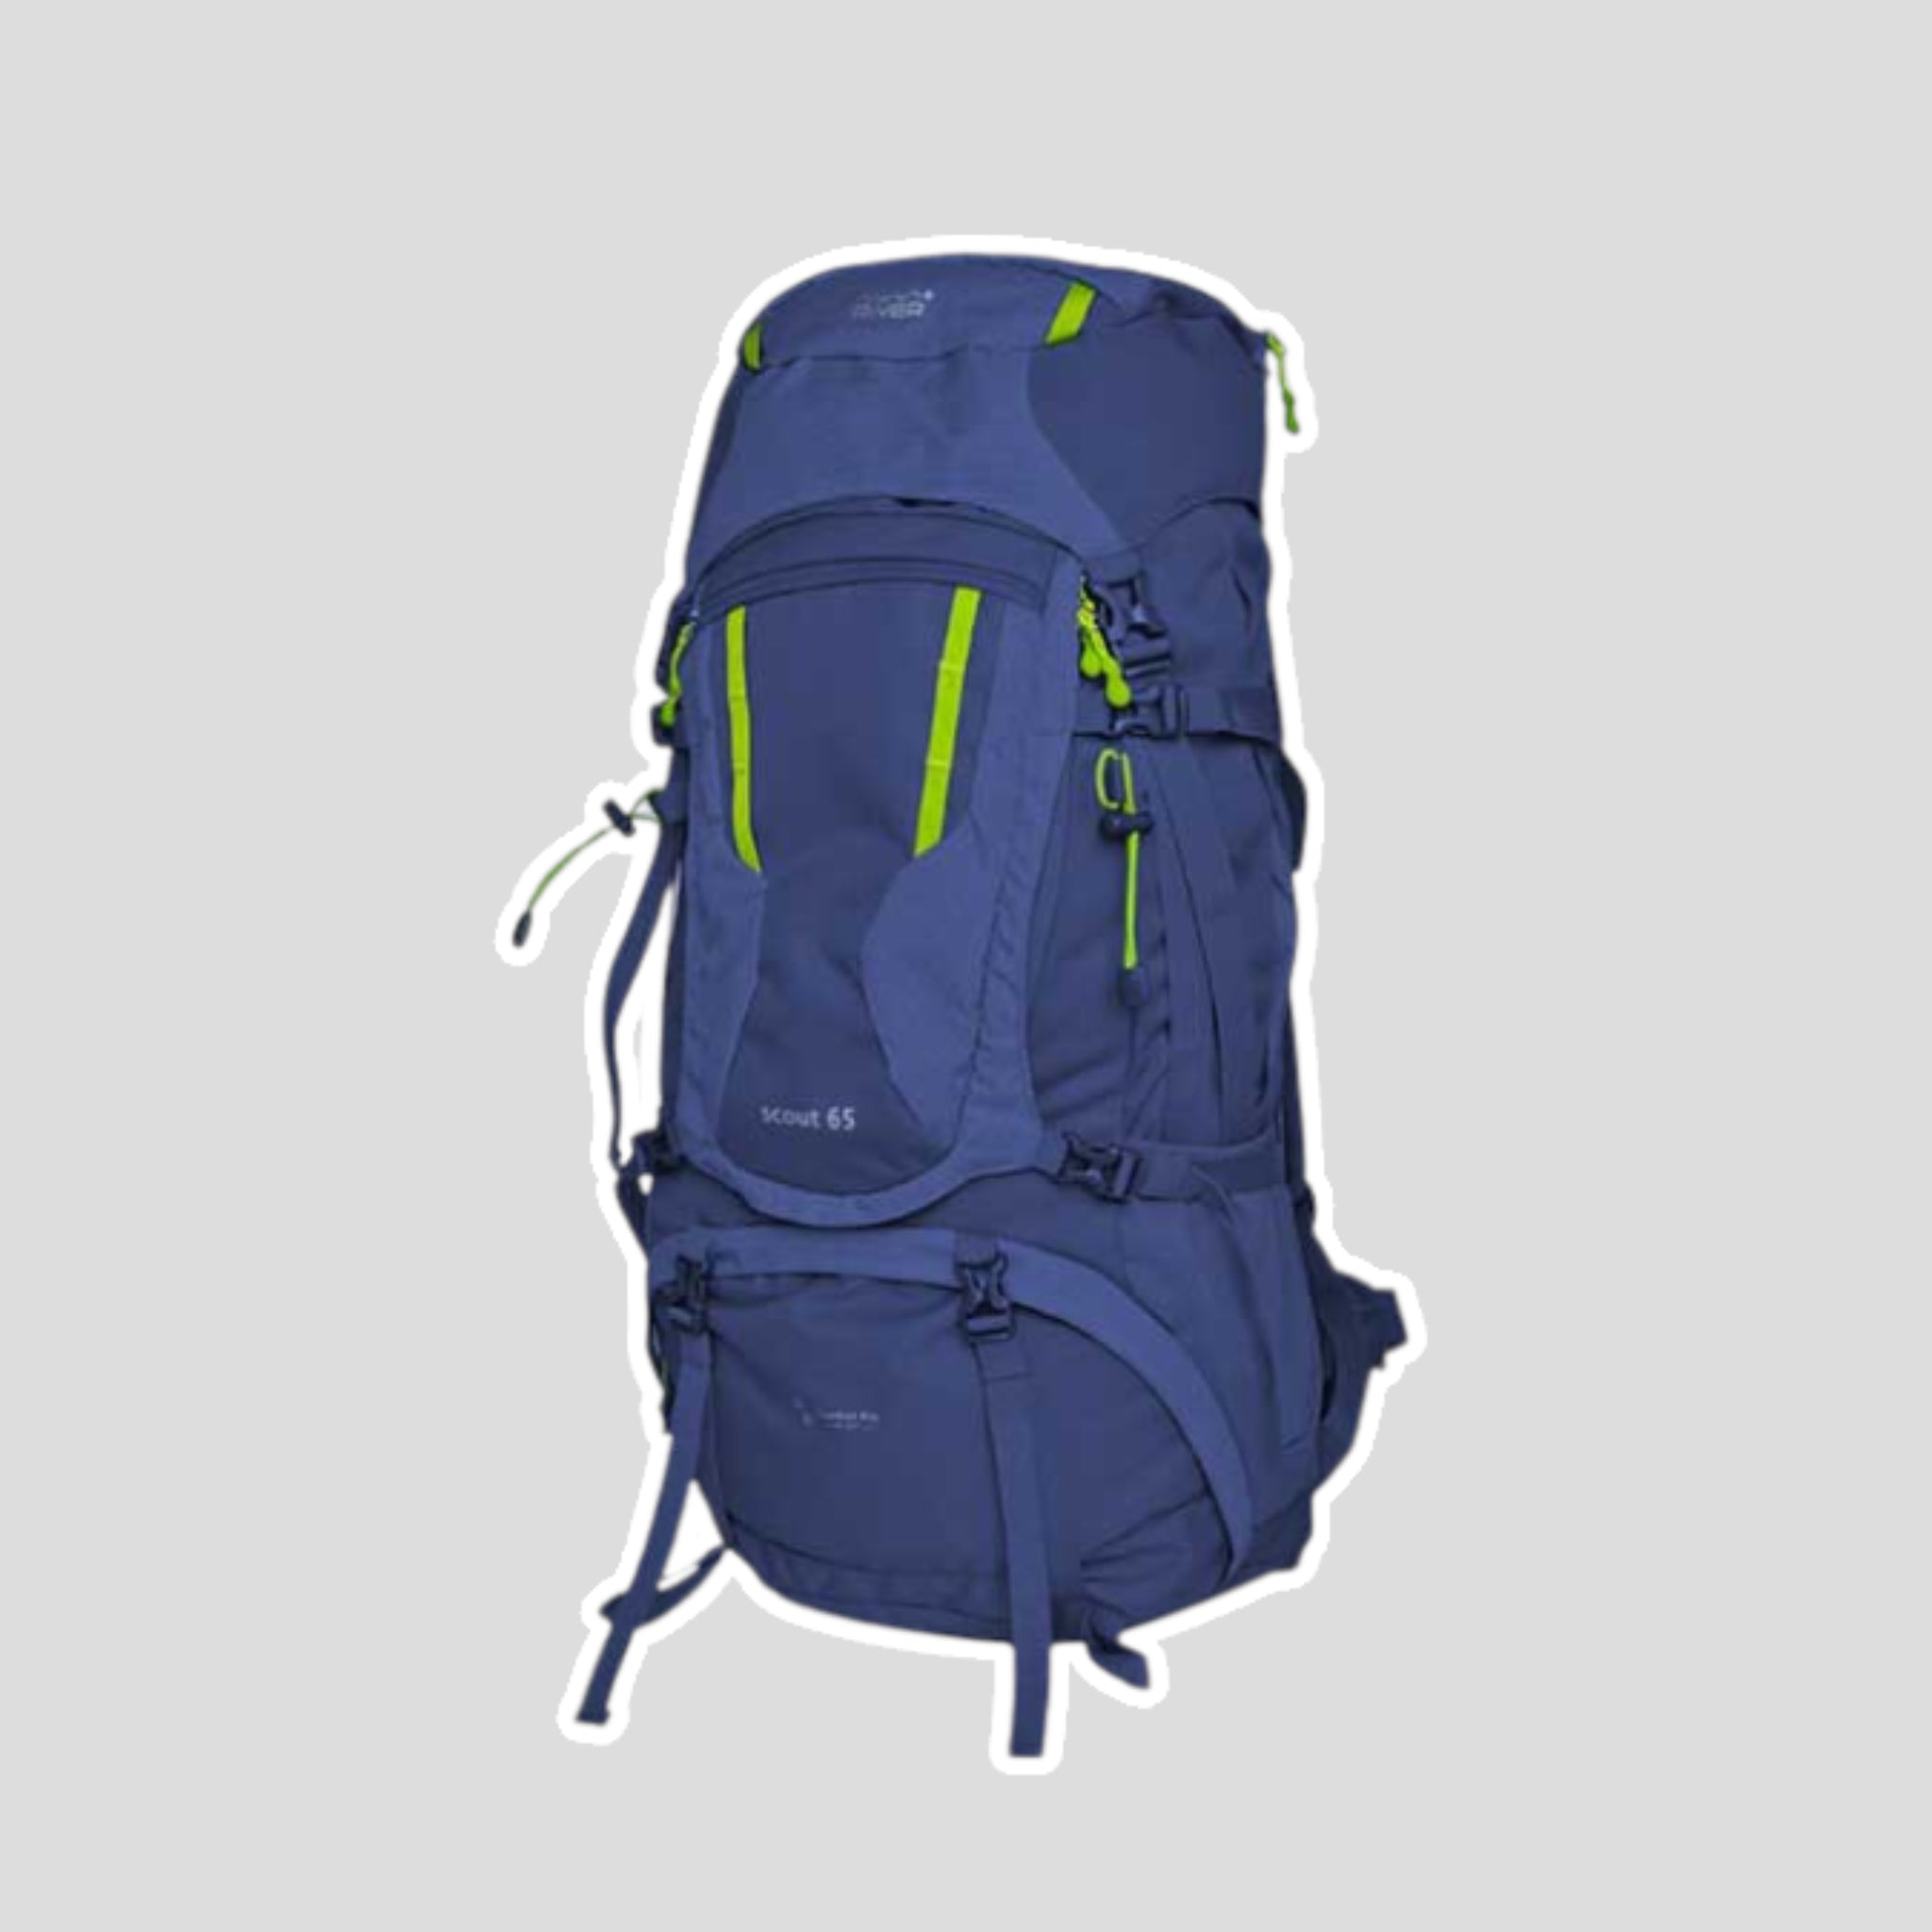 Scout & Scouter Rucksack Deal | Rock N River | Portwest - The Outdoor Shop